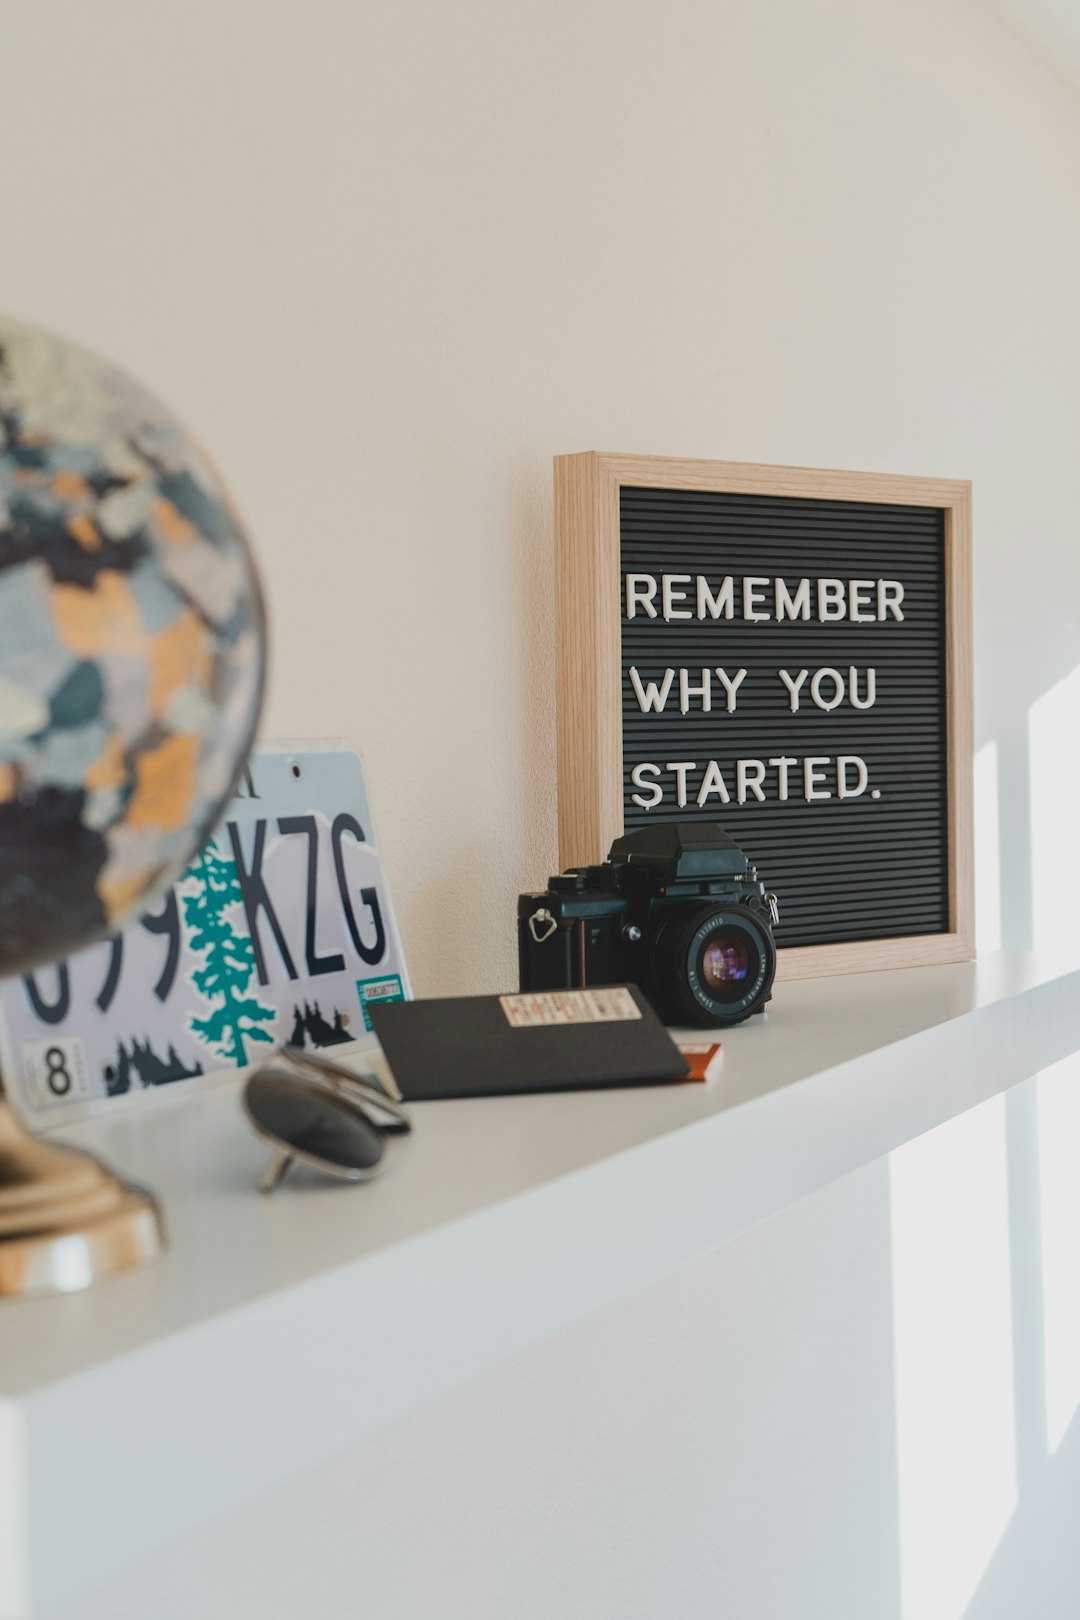 Photo of objects on a mantle, including Oregon license plate, globe, passport, black camera, and a black frame with white lettering, "Remember why you started."